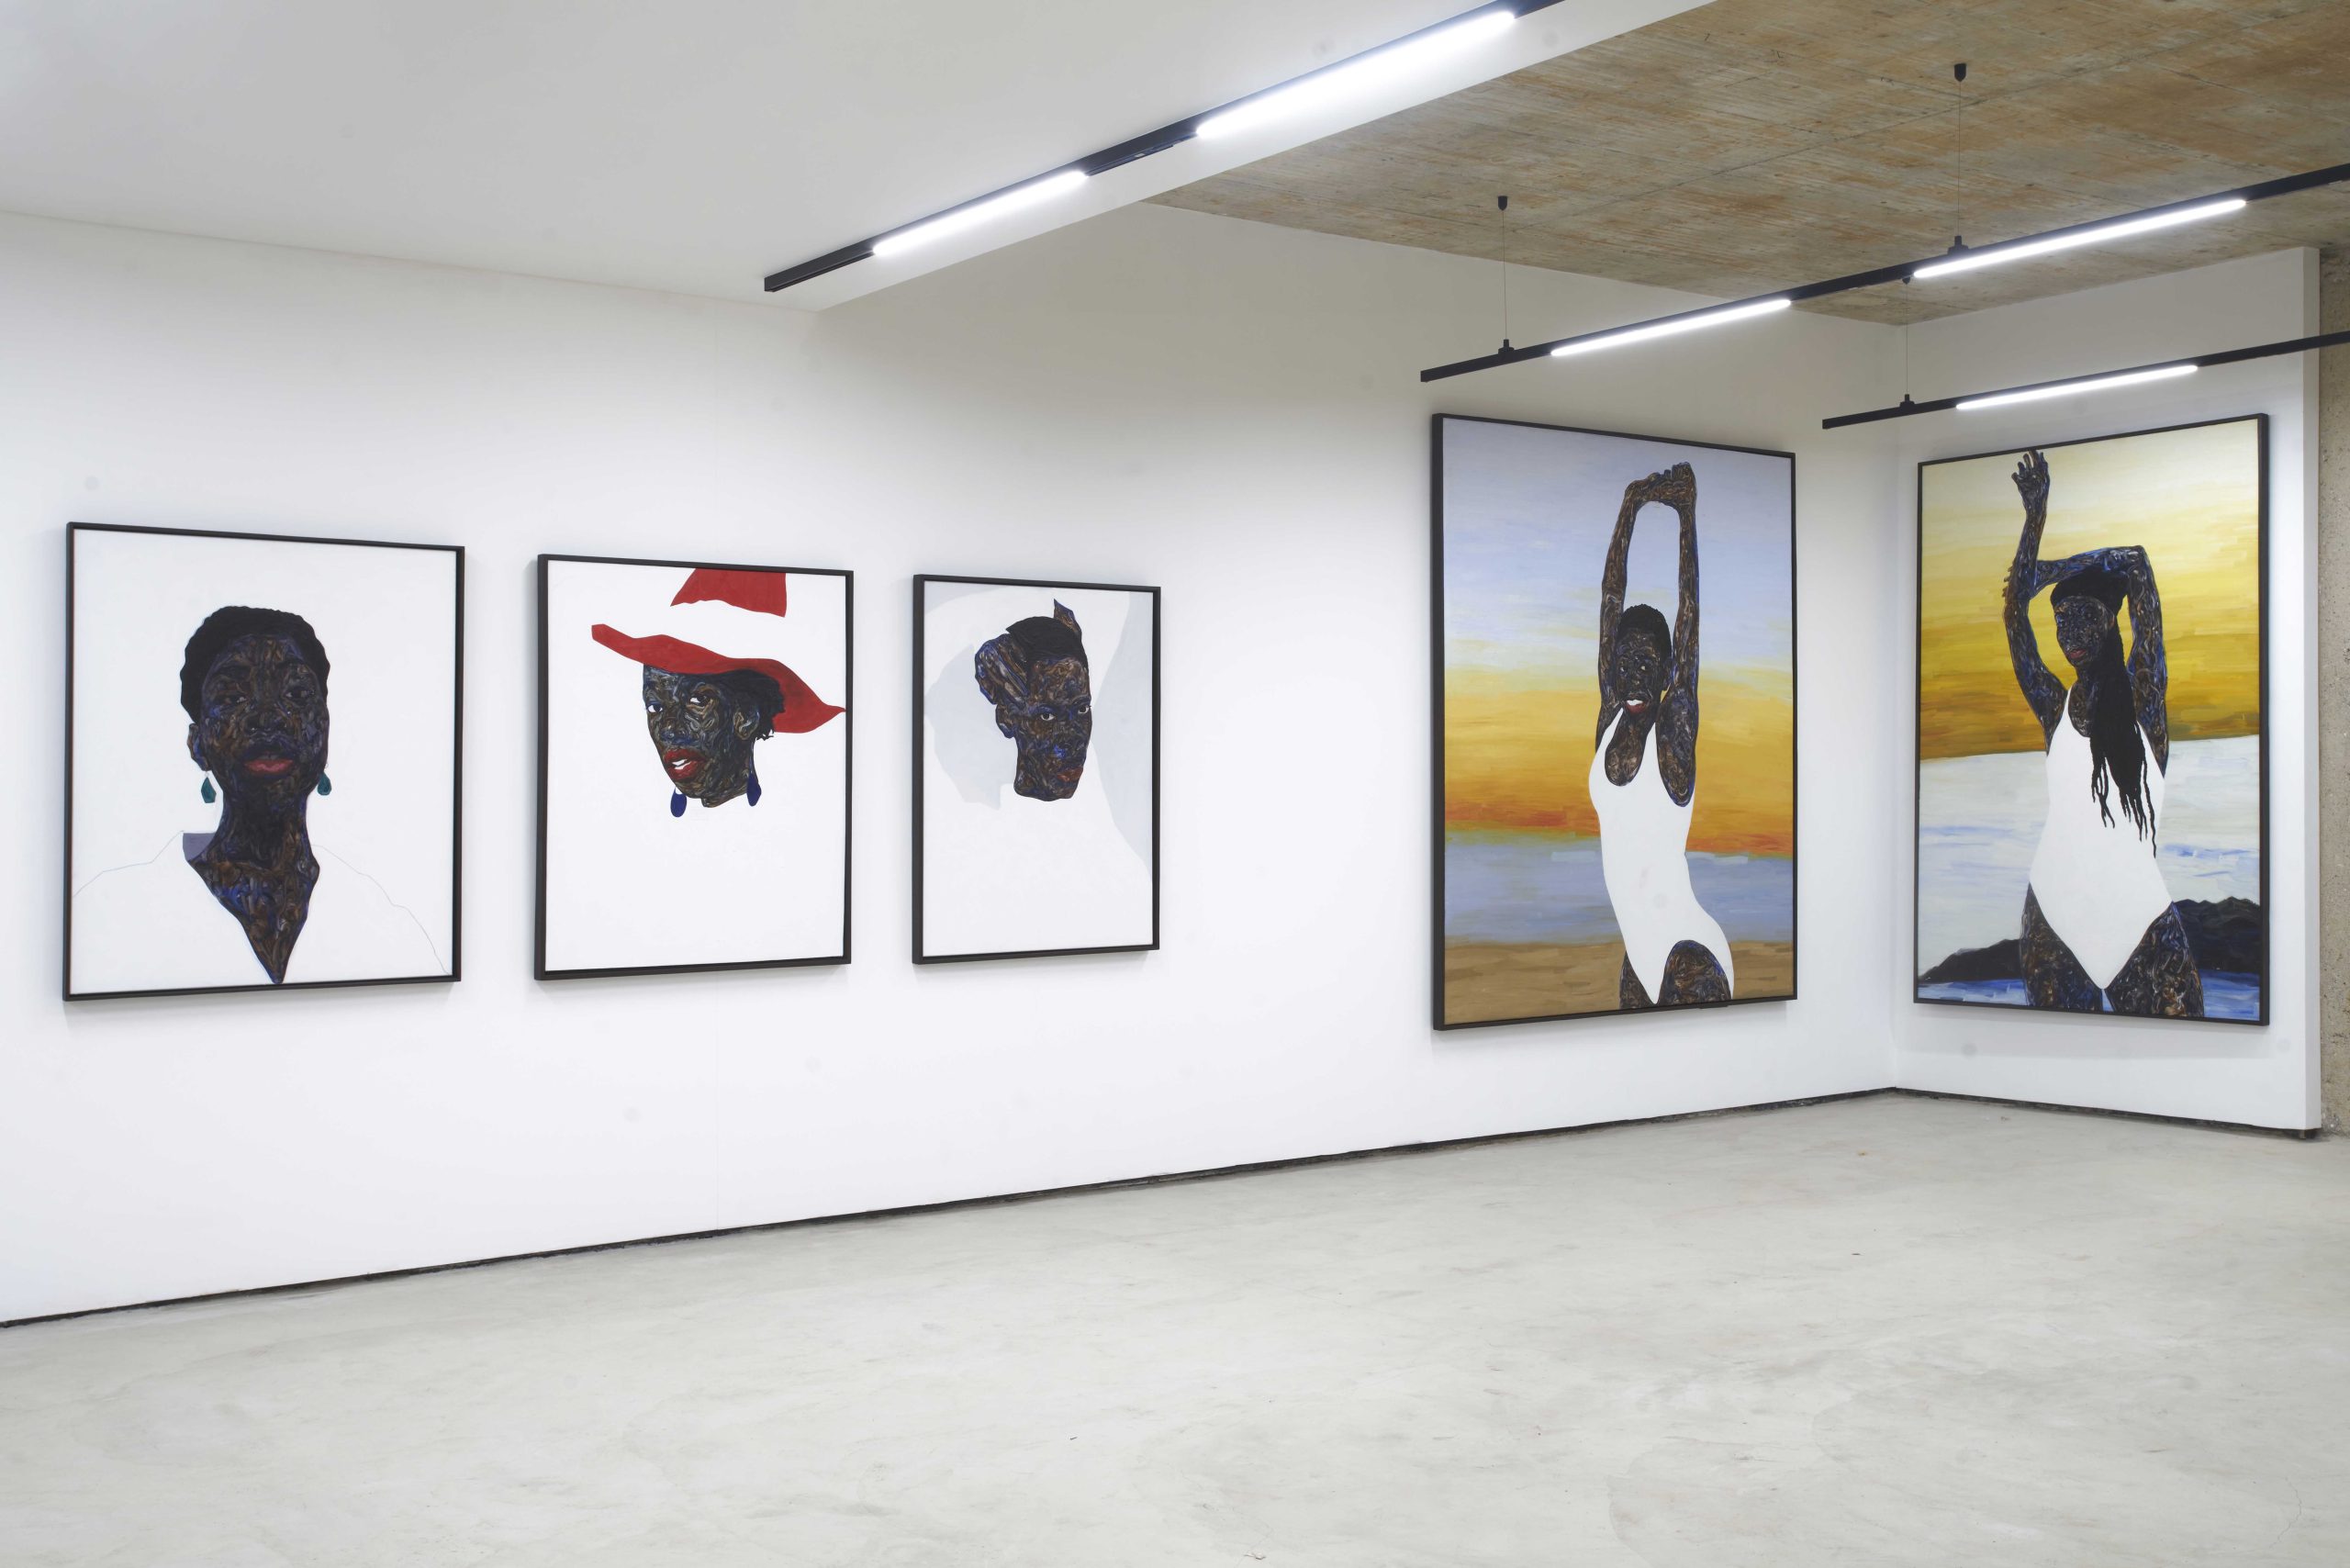 Installation view of Amoako Boafo’s Homegrown at dot.ateliers. (Image by Nii Odzenma/ courtesy of dot.ateliers)